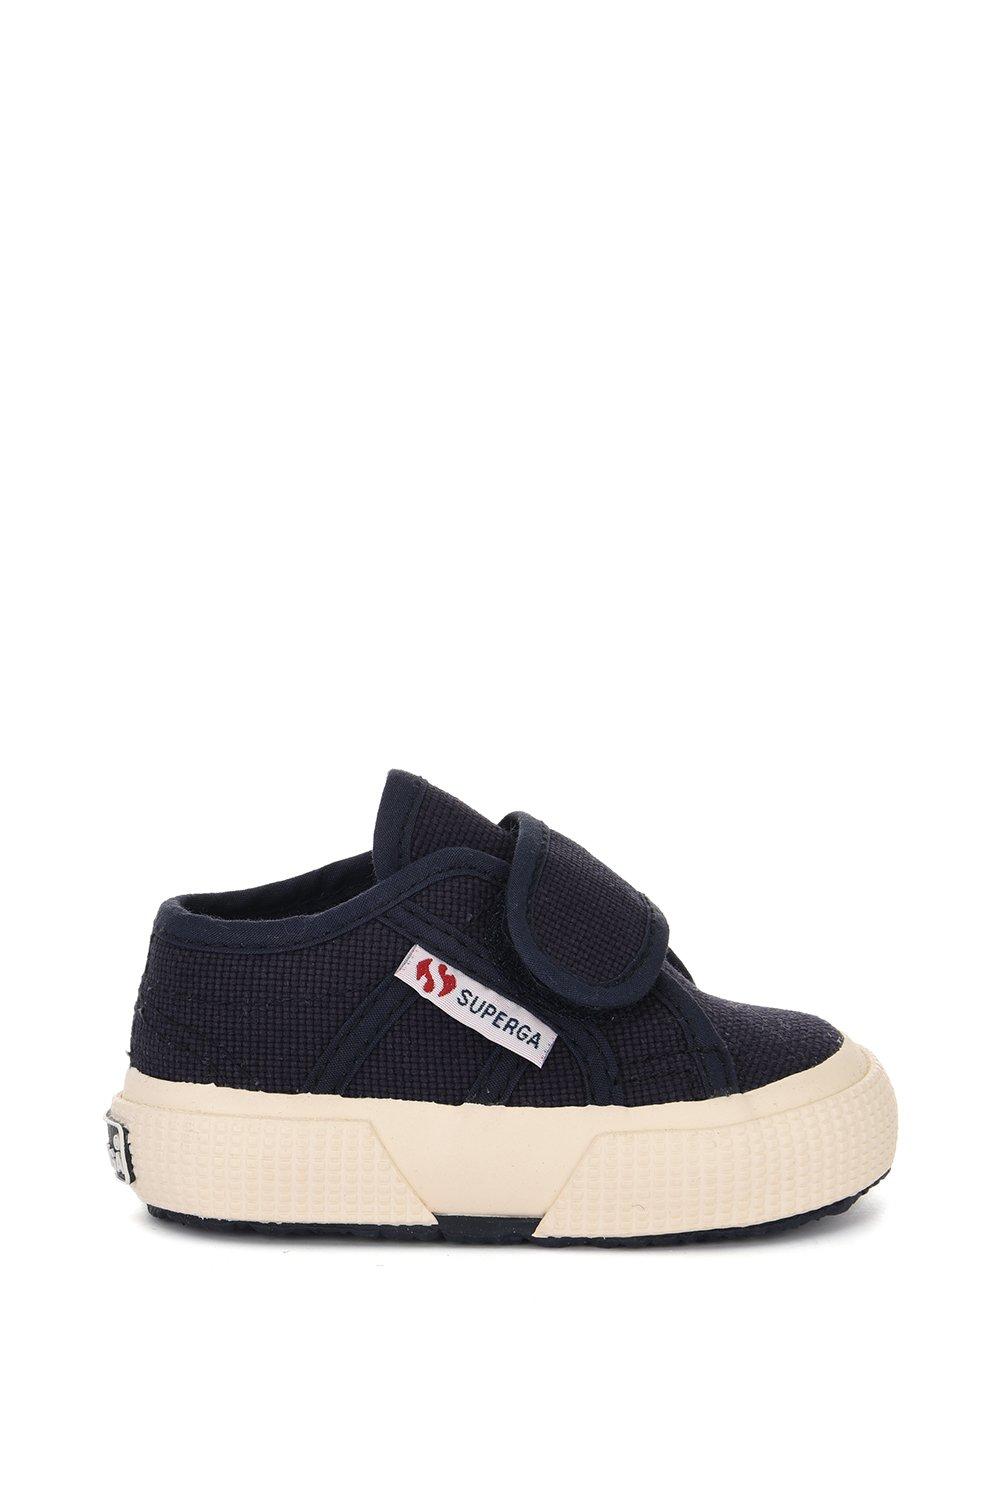 ’2750 Baby Cotu Classic’ Strap Canvas Trainers